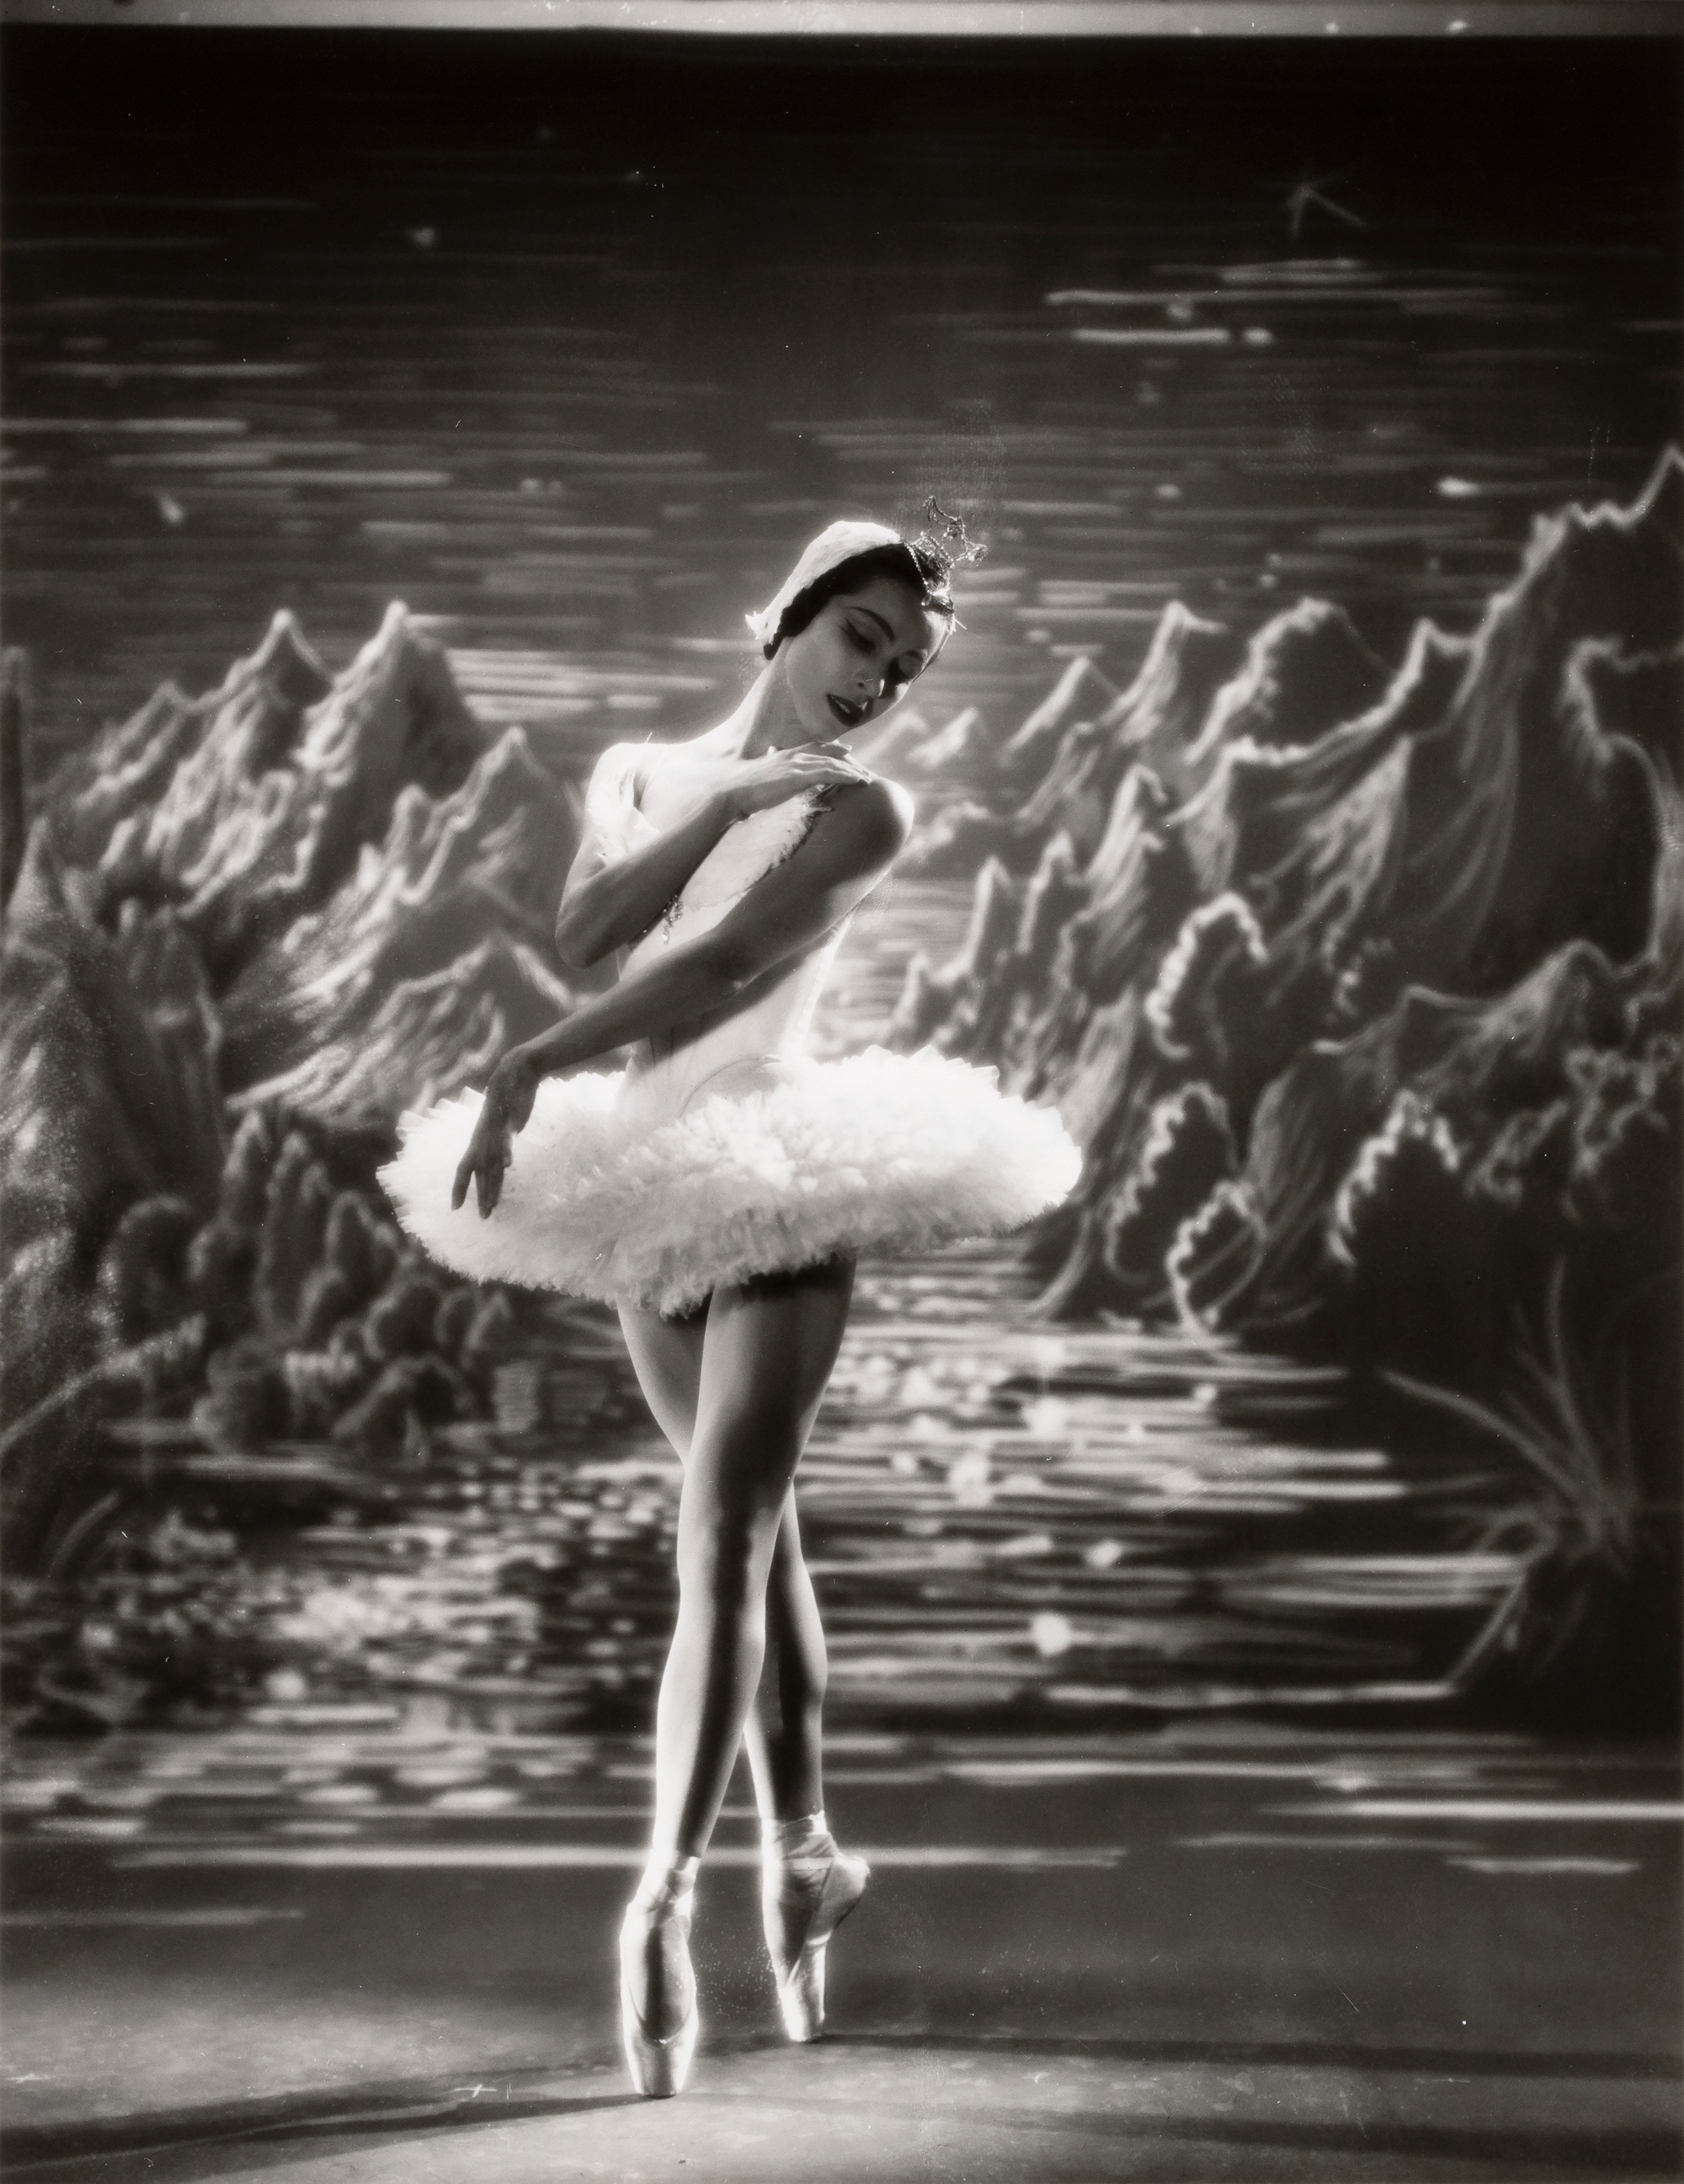 A black-and-white photograph of a ballet dancer in a tutu performing in front of an illustrated backdrop depicting a mountainous landscape.